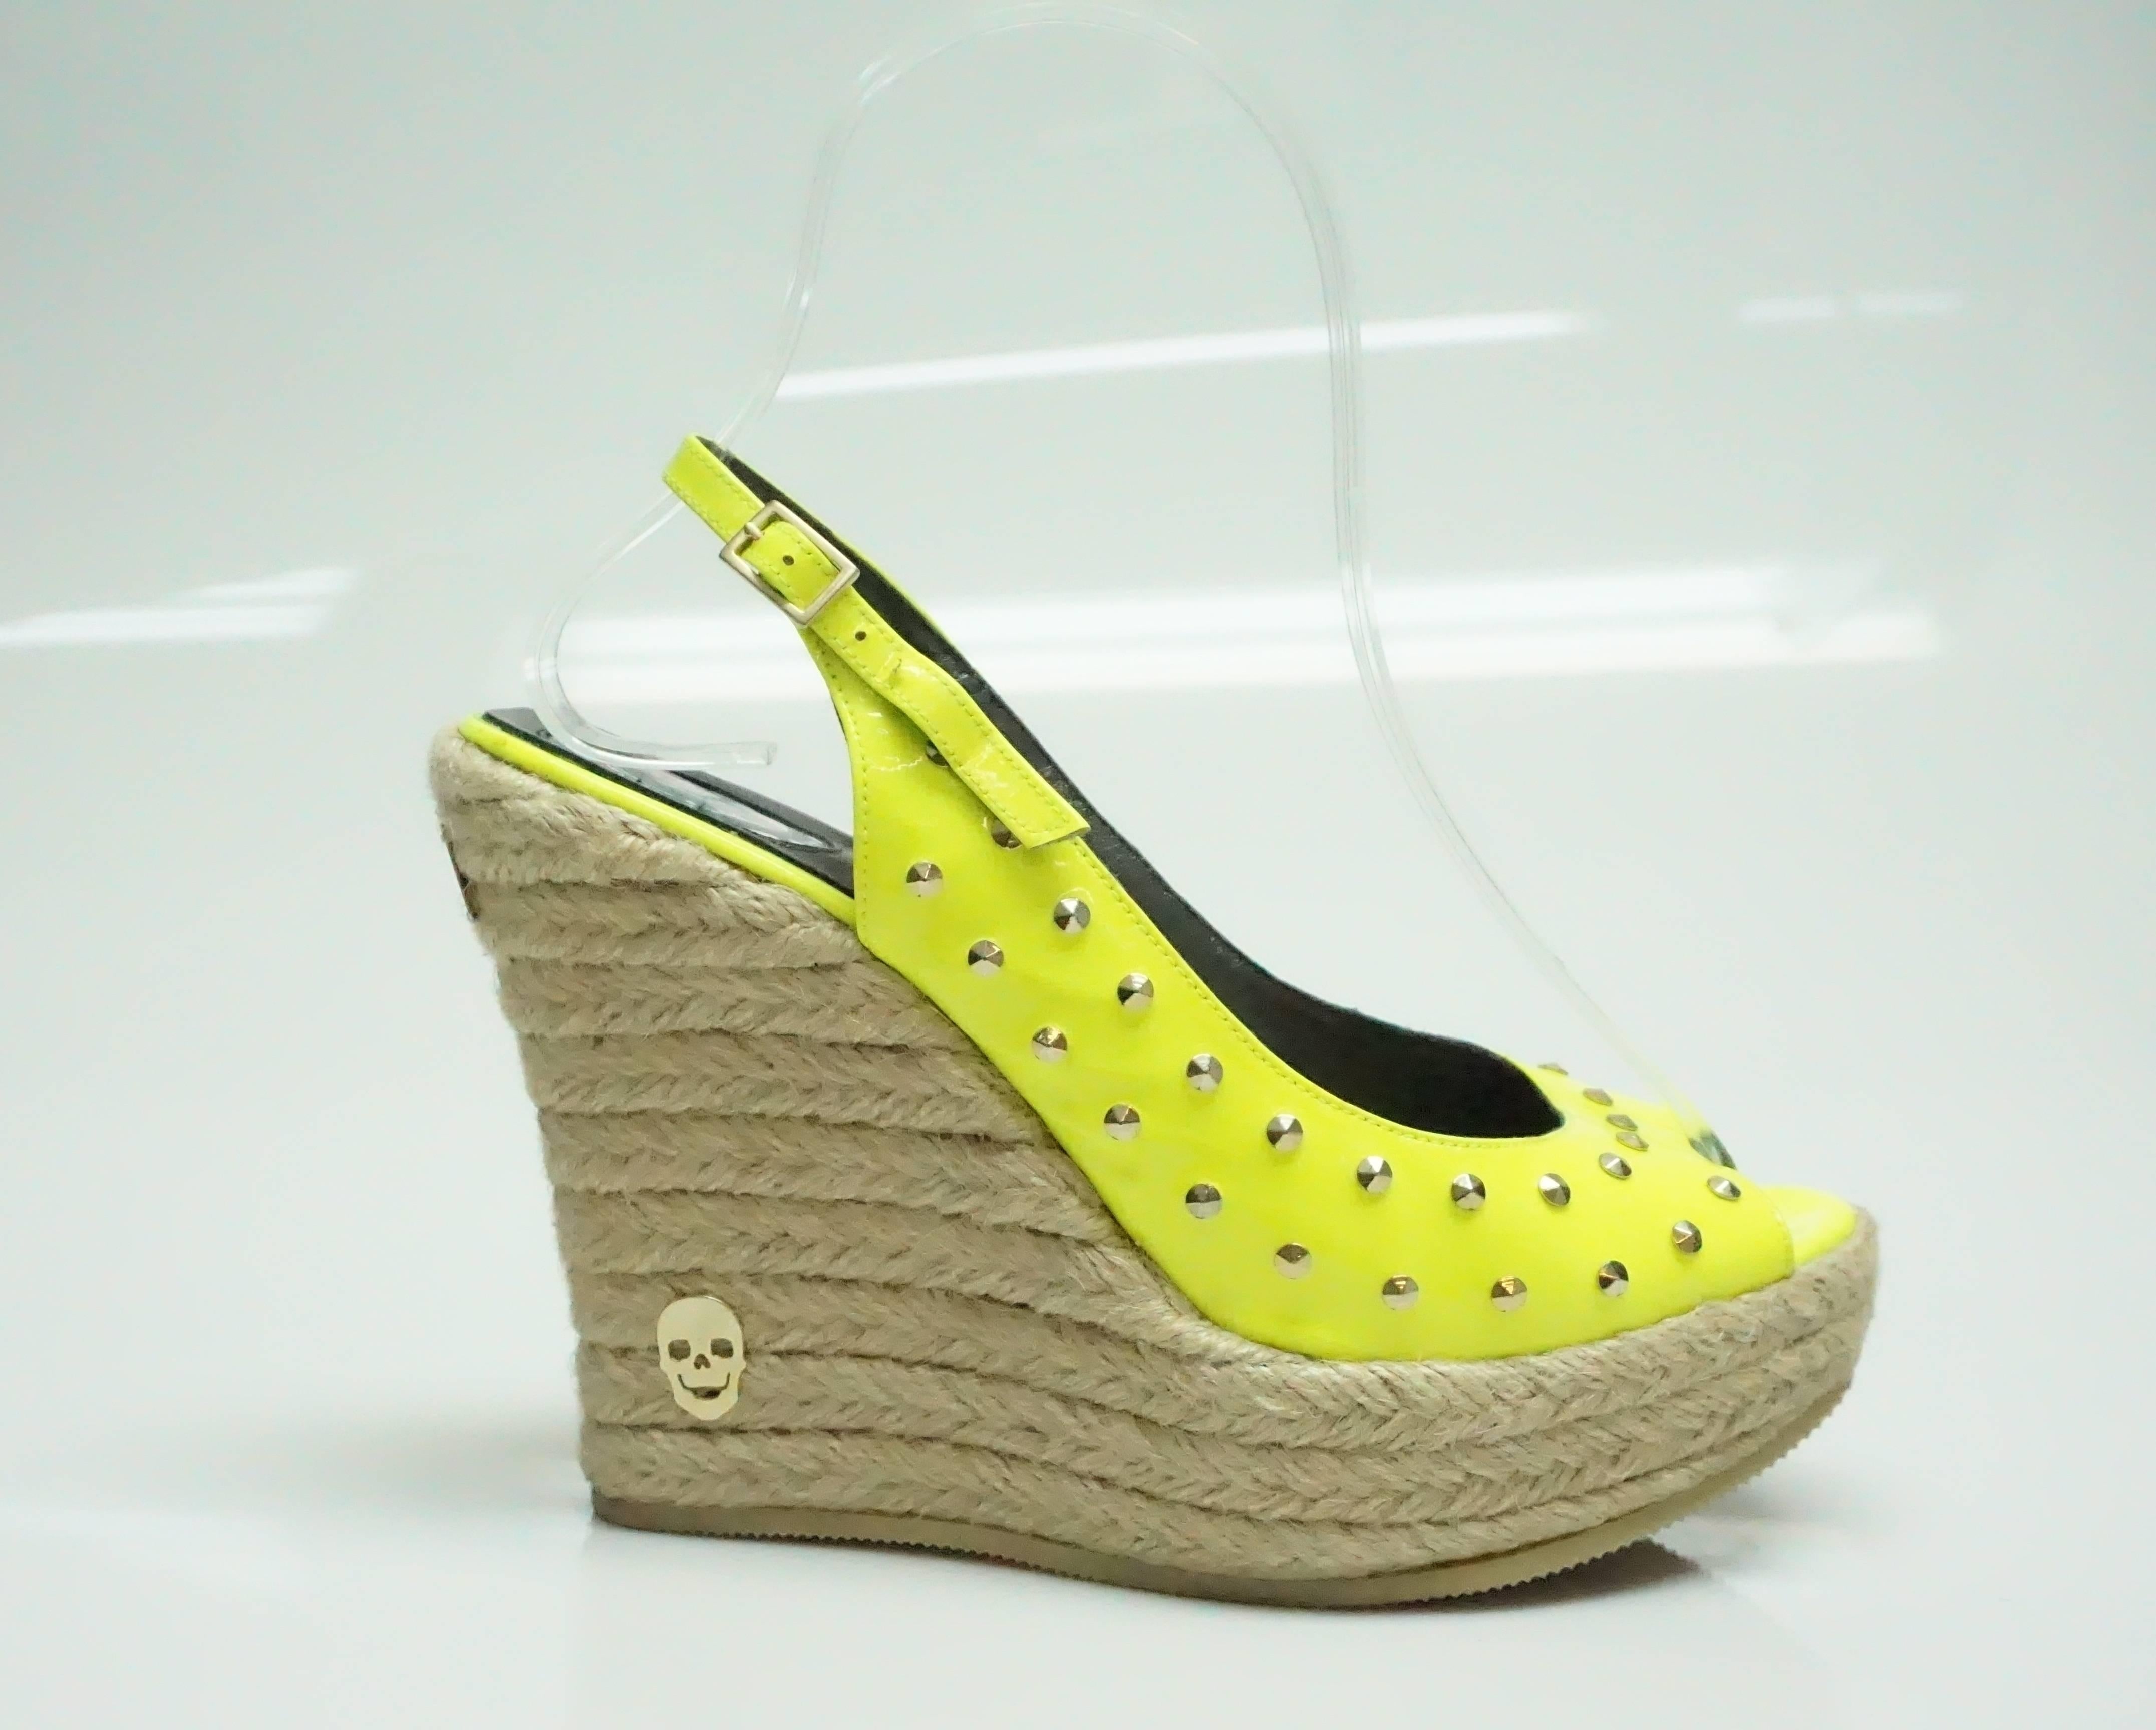 Phillip Plein Lime Patent Raffia Slingback Wedge - 37  These beautifully bright wedges are in excellent condition. They are made of a neon lime patent material and are embellished with silver studs. It is a slingback style shoe and the wedges have a